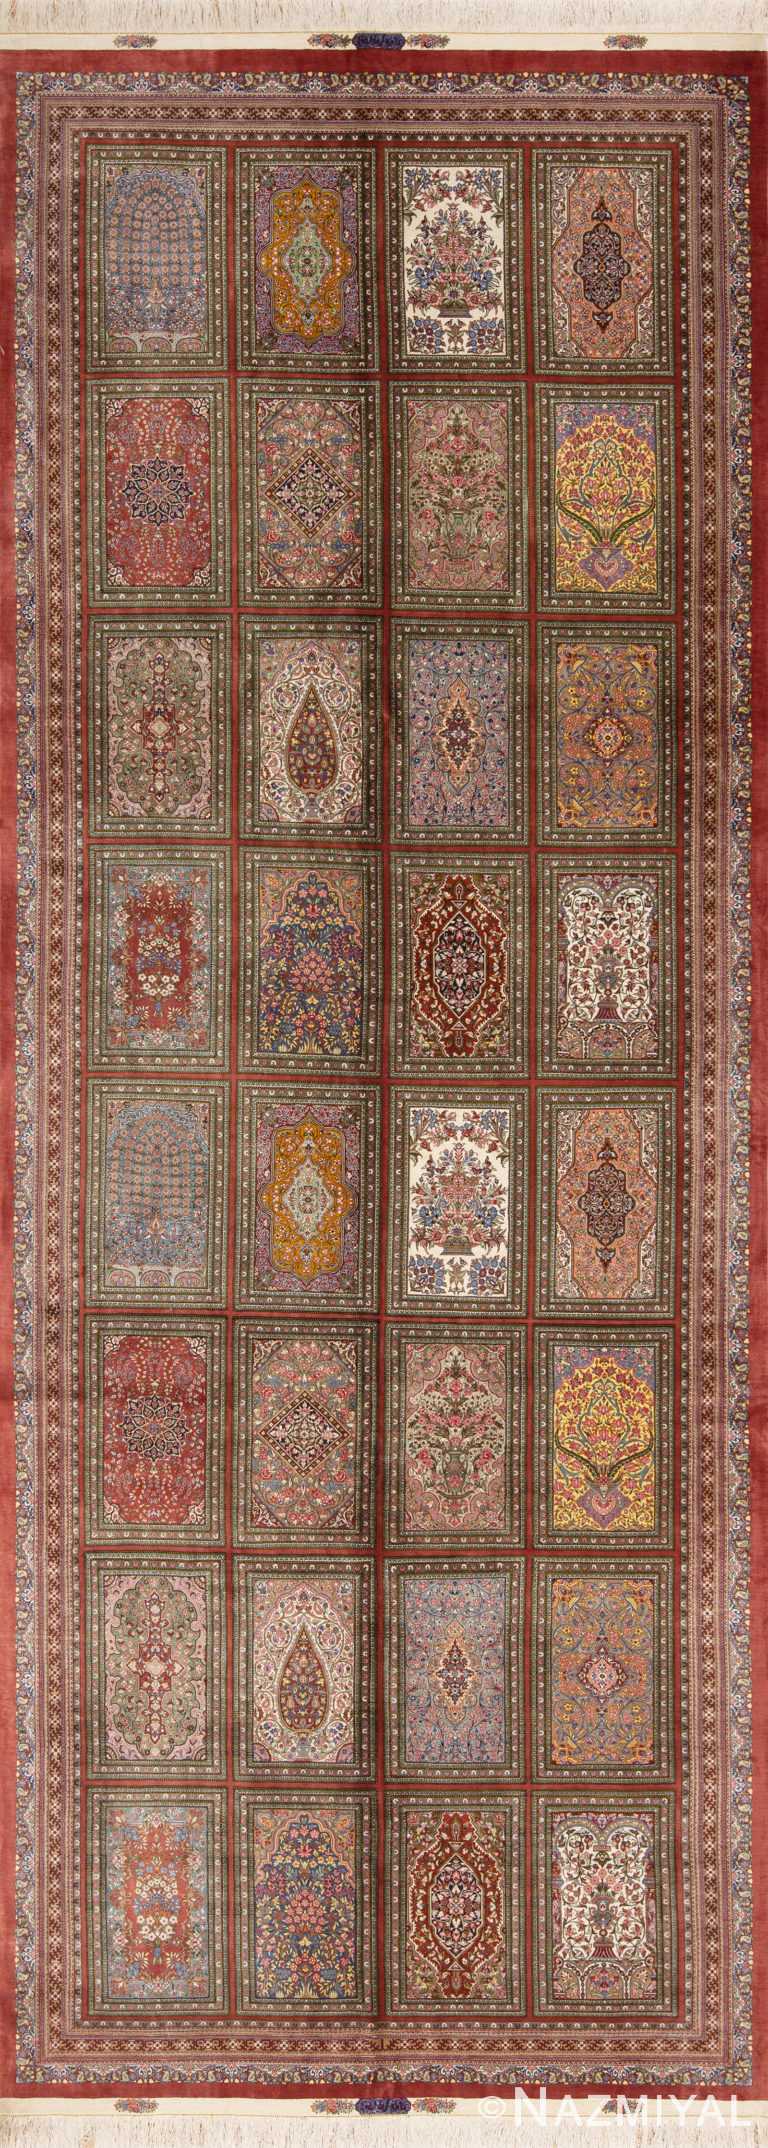 Fine Floral Long Narrow Gallery Size Vintage Luxury Persian Silk Qum Rug 72744 by Nazmiyal Antique Rugs